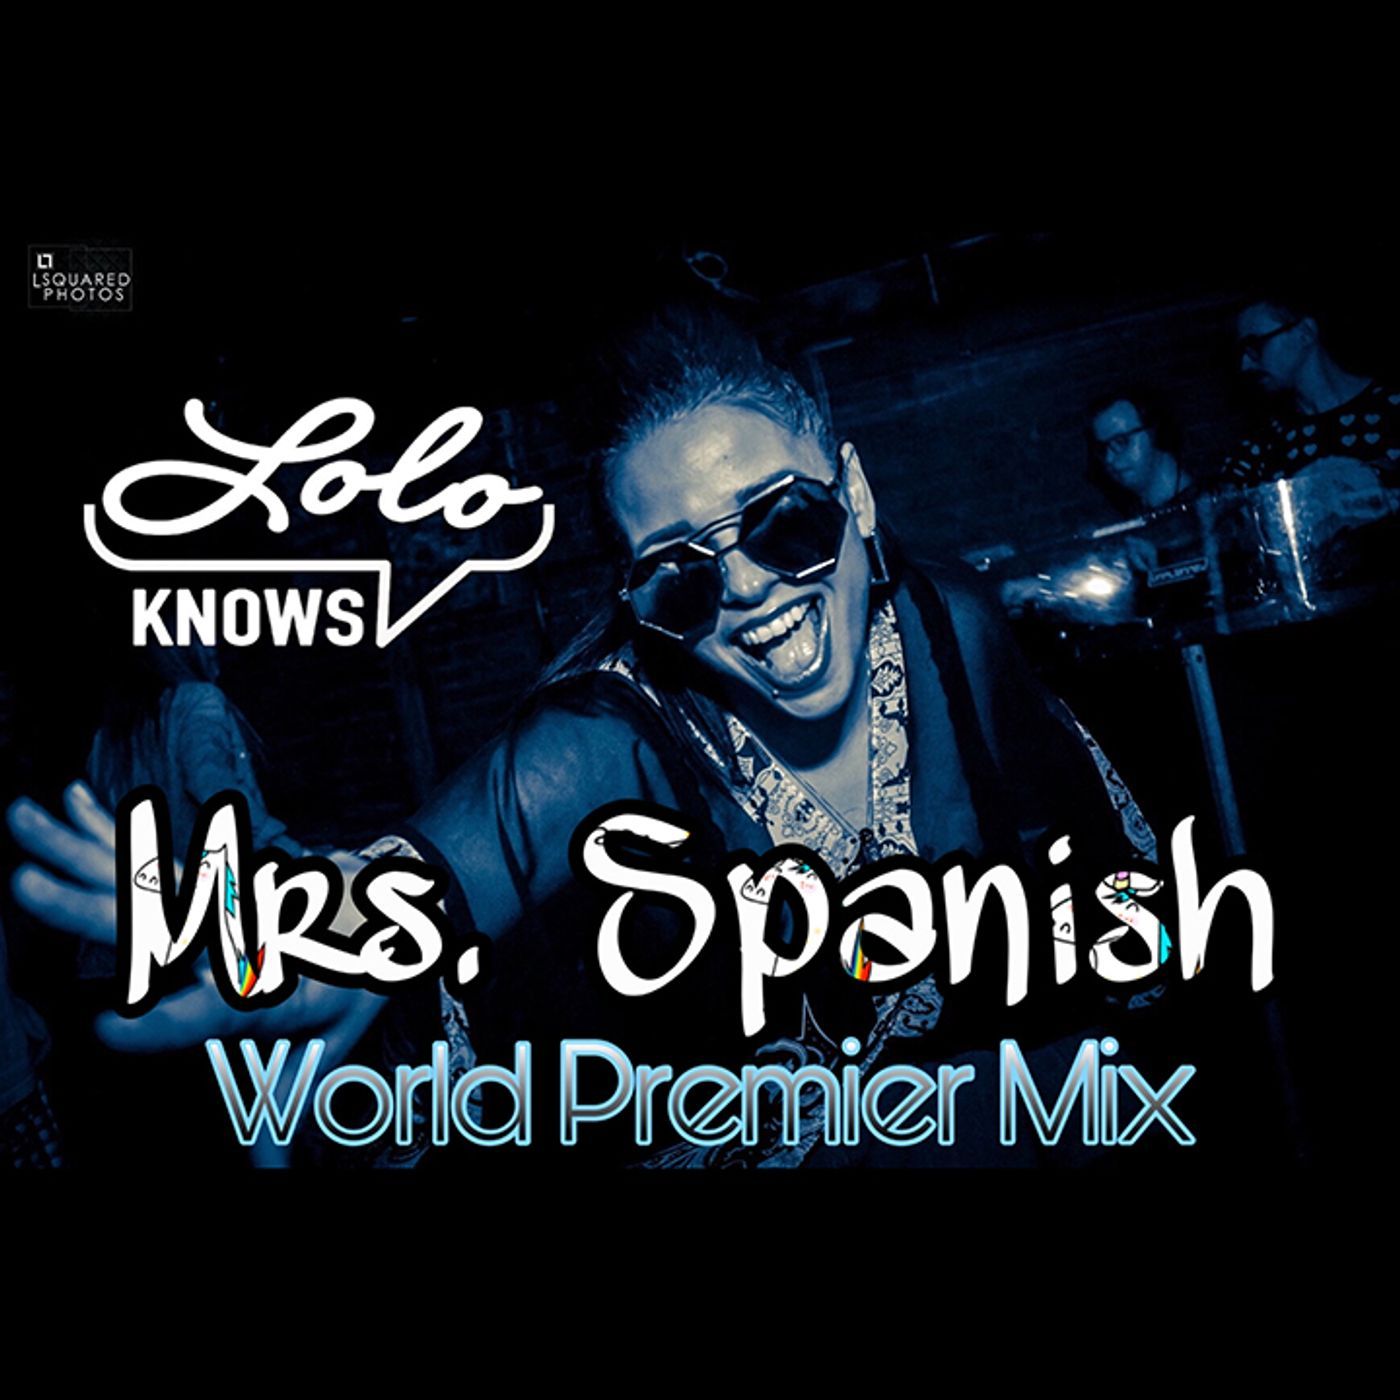 Mrs. Spanish by Lolo Knows, Cleveland/Akron